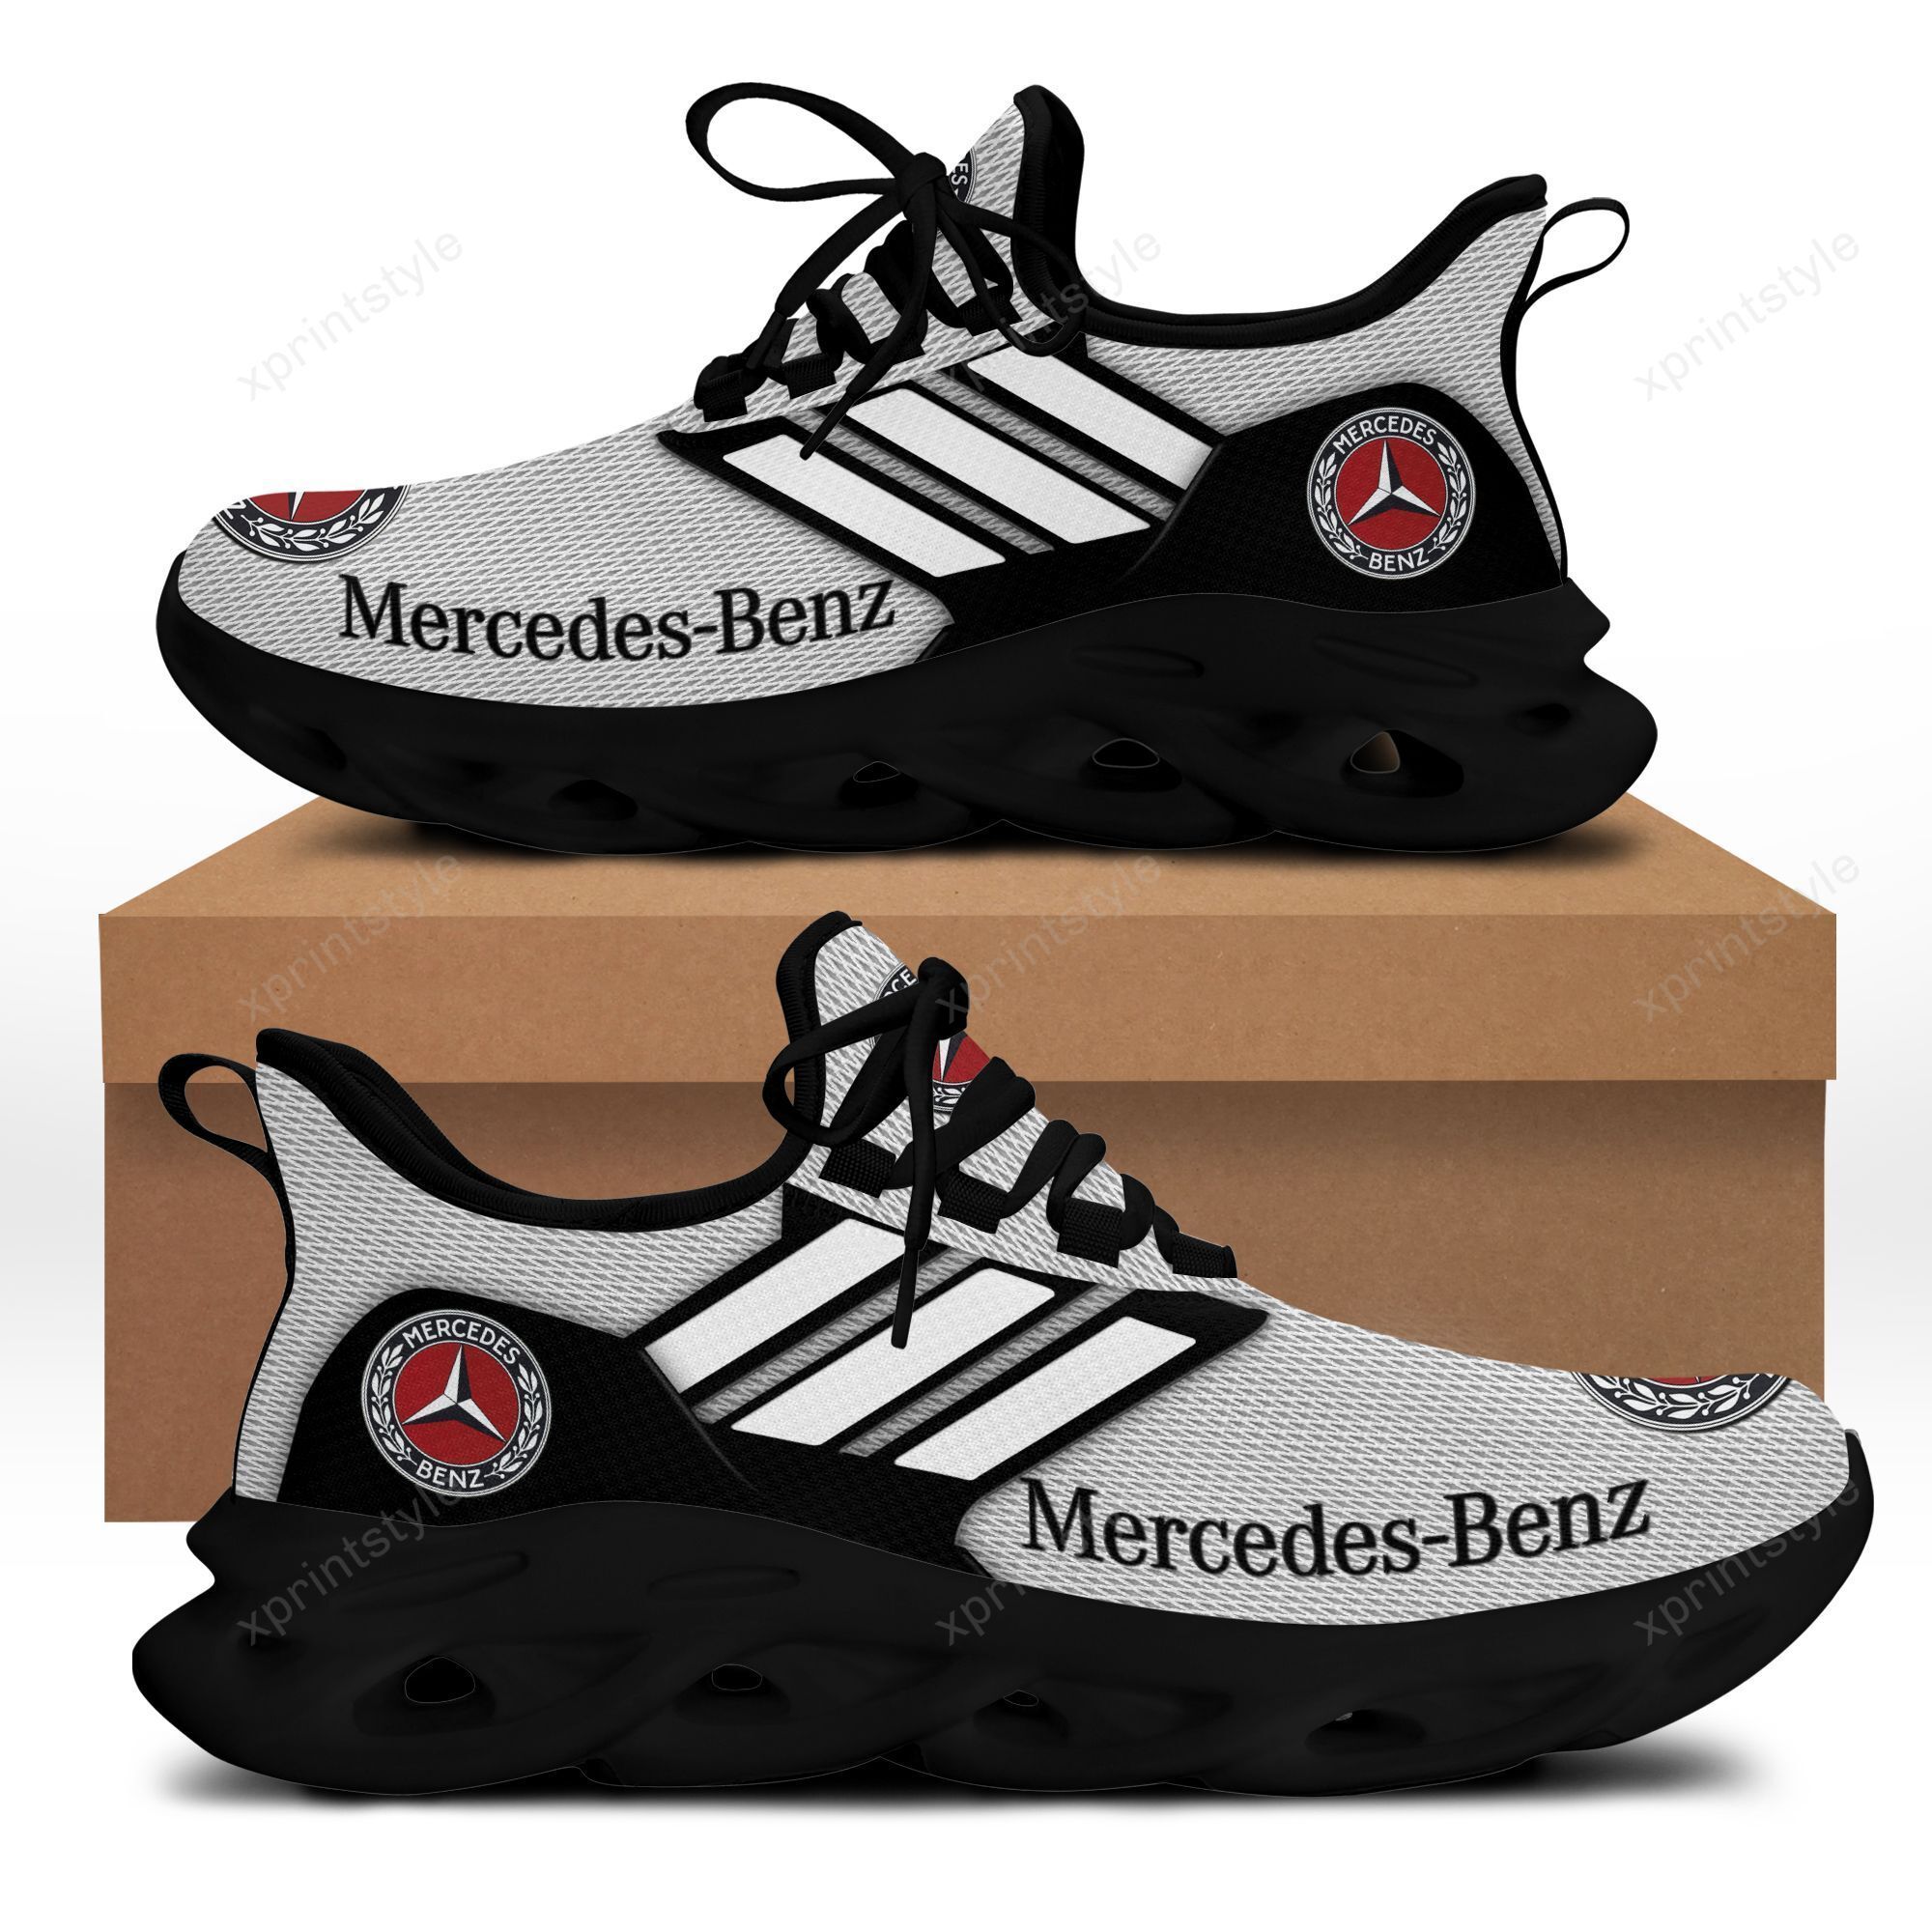 MERCEDES-BENZ AMG RUNNING SHOES VER 4 – Fashionspicex Shop